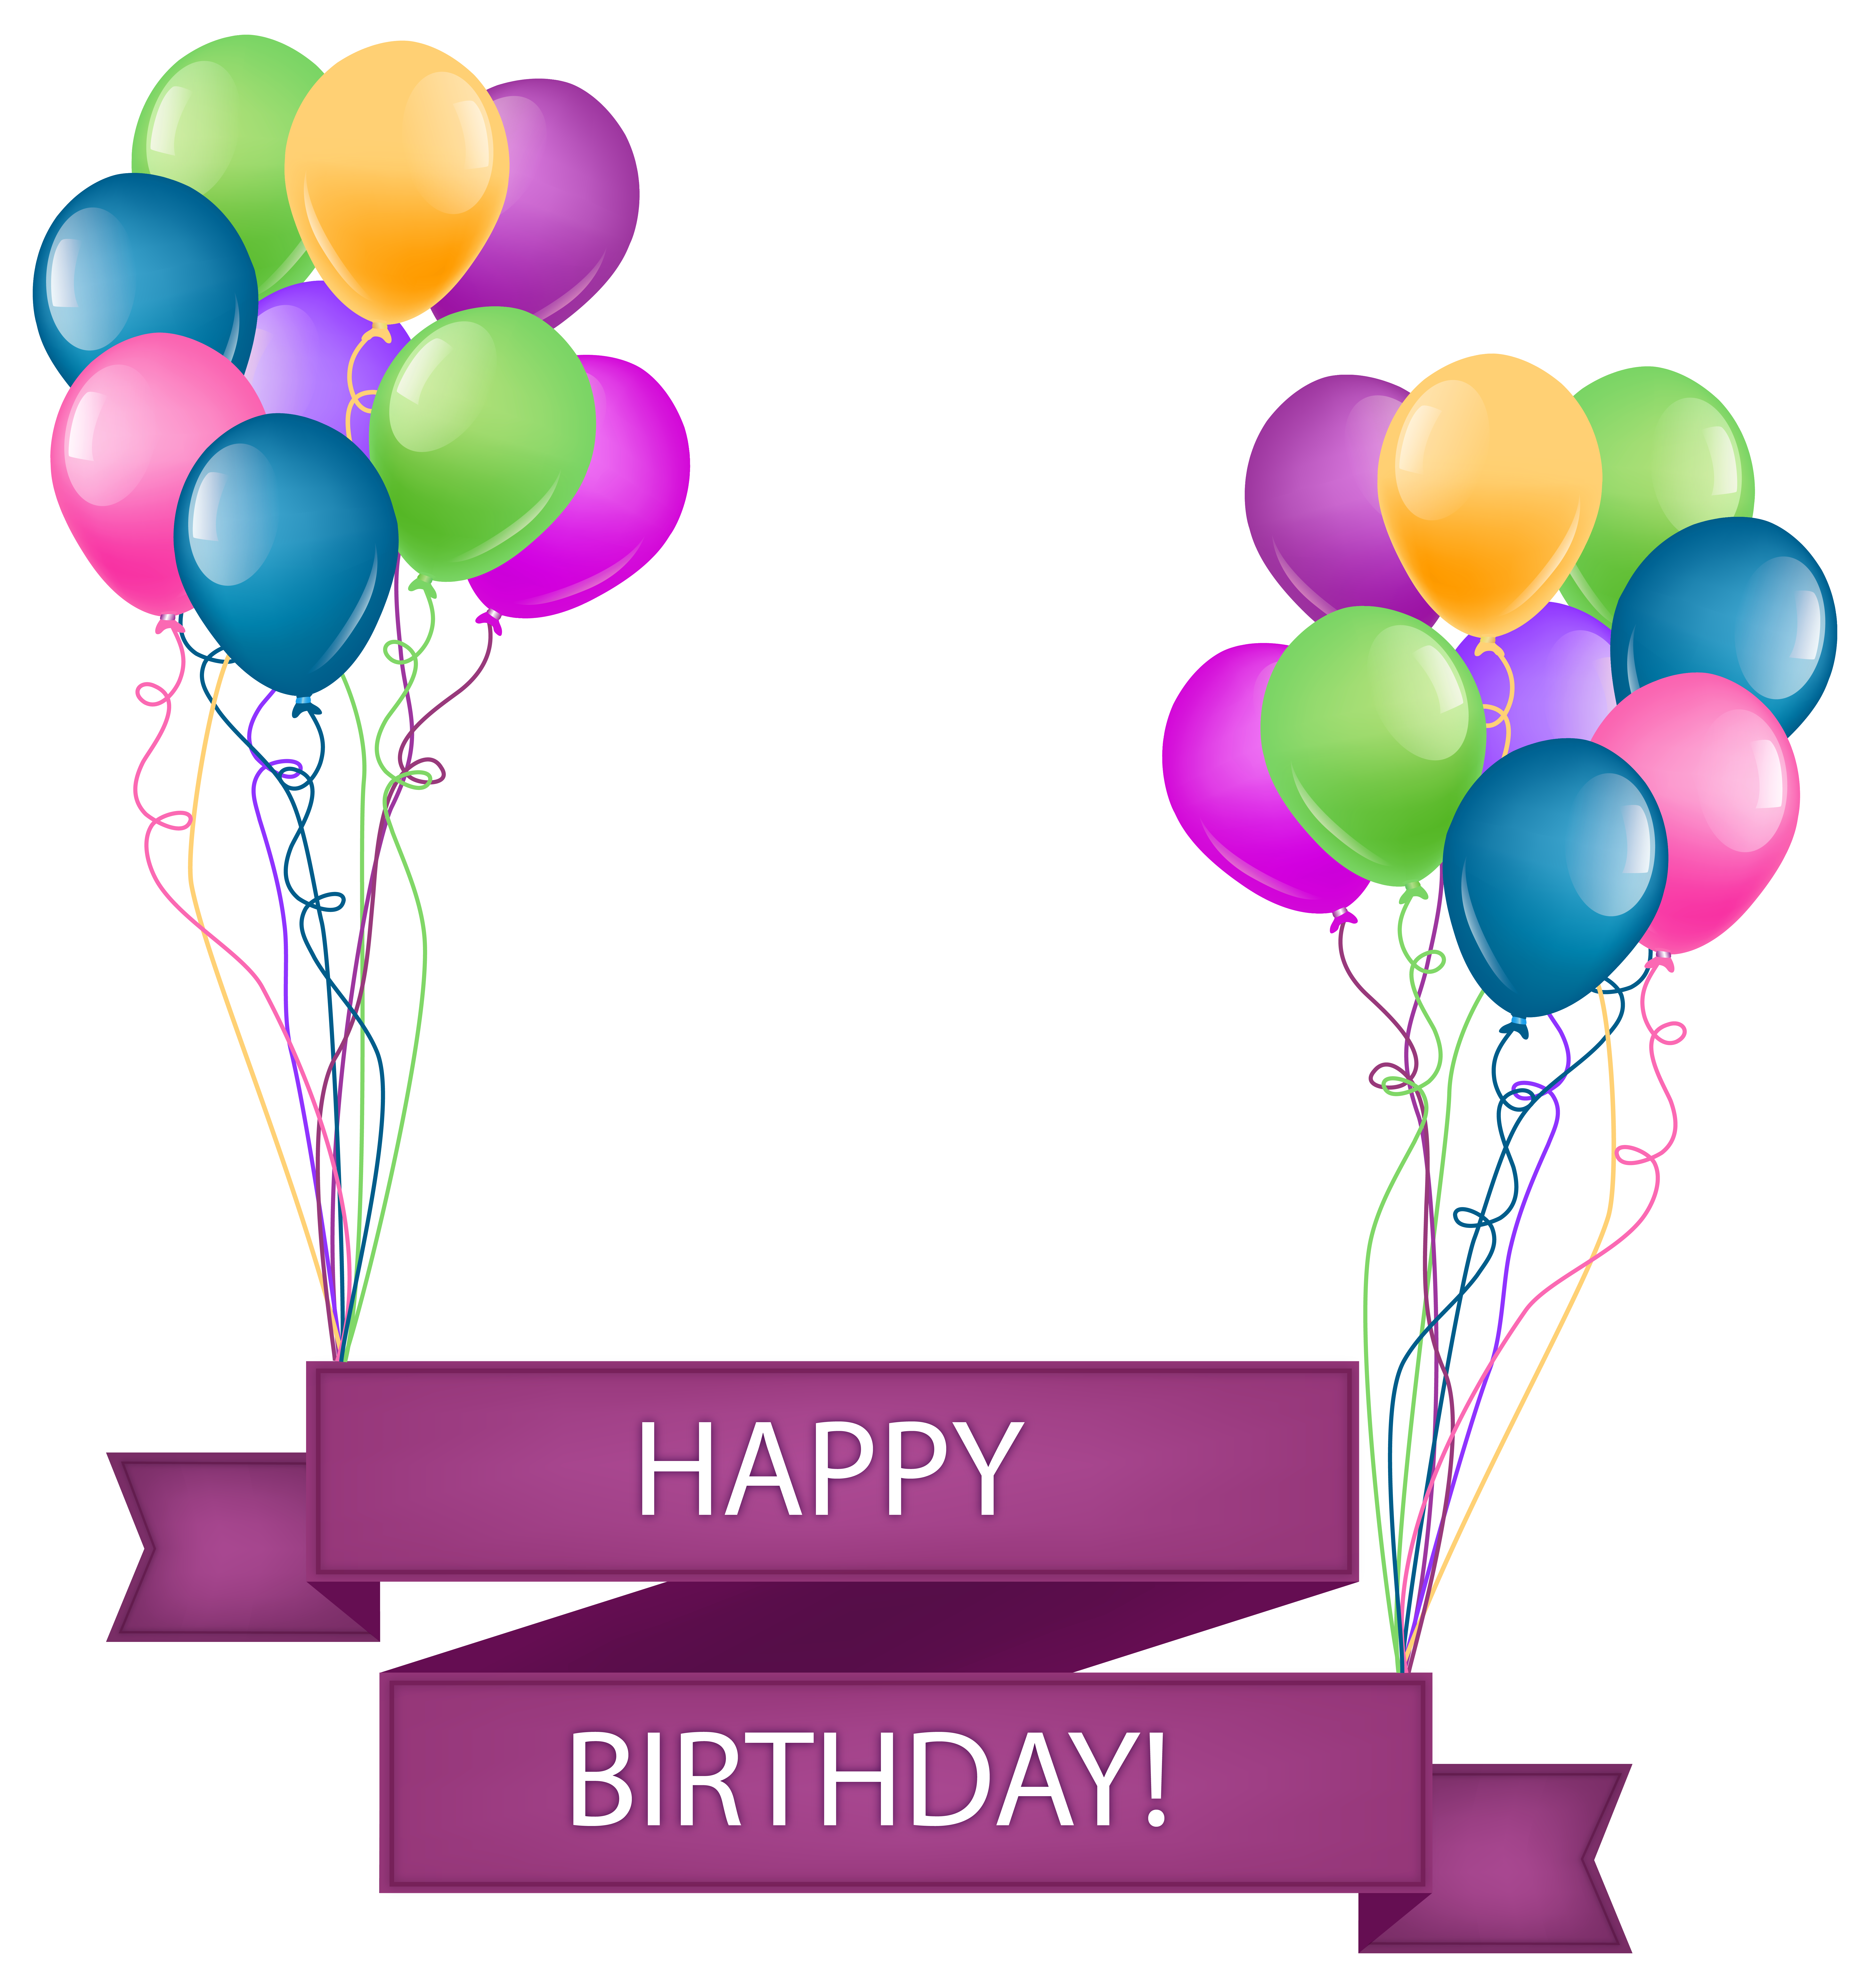 Happy birthday banner with. Clipart balloon presents